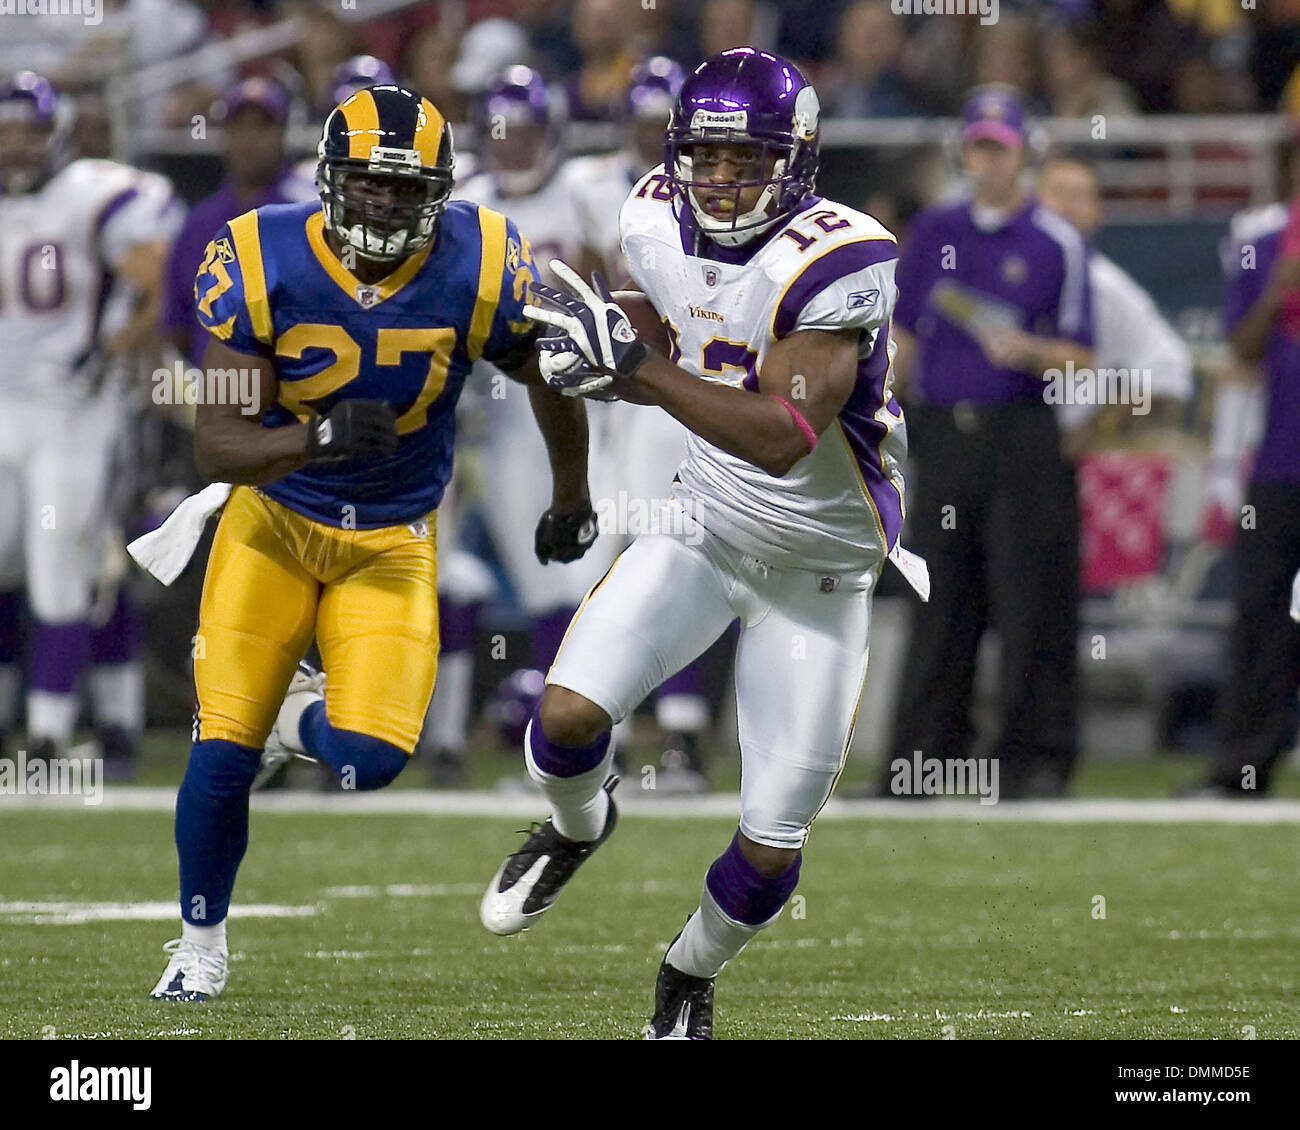 Oct 11, 2009 - St Louis, Missouri, USA - NFL Football - Viking receiver PERCY HARVIN (12) is chased by Rams safety David Roach (27) in the game between the St Louis Rams and the Minnesota Vikings at the Edward Jones Dome.  The Vikings defeated the Rams 38 to 10.  (Credit Image: © Mike Granse/ZUMA Press) Stock Photo